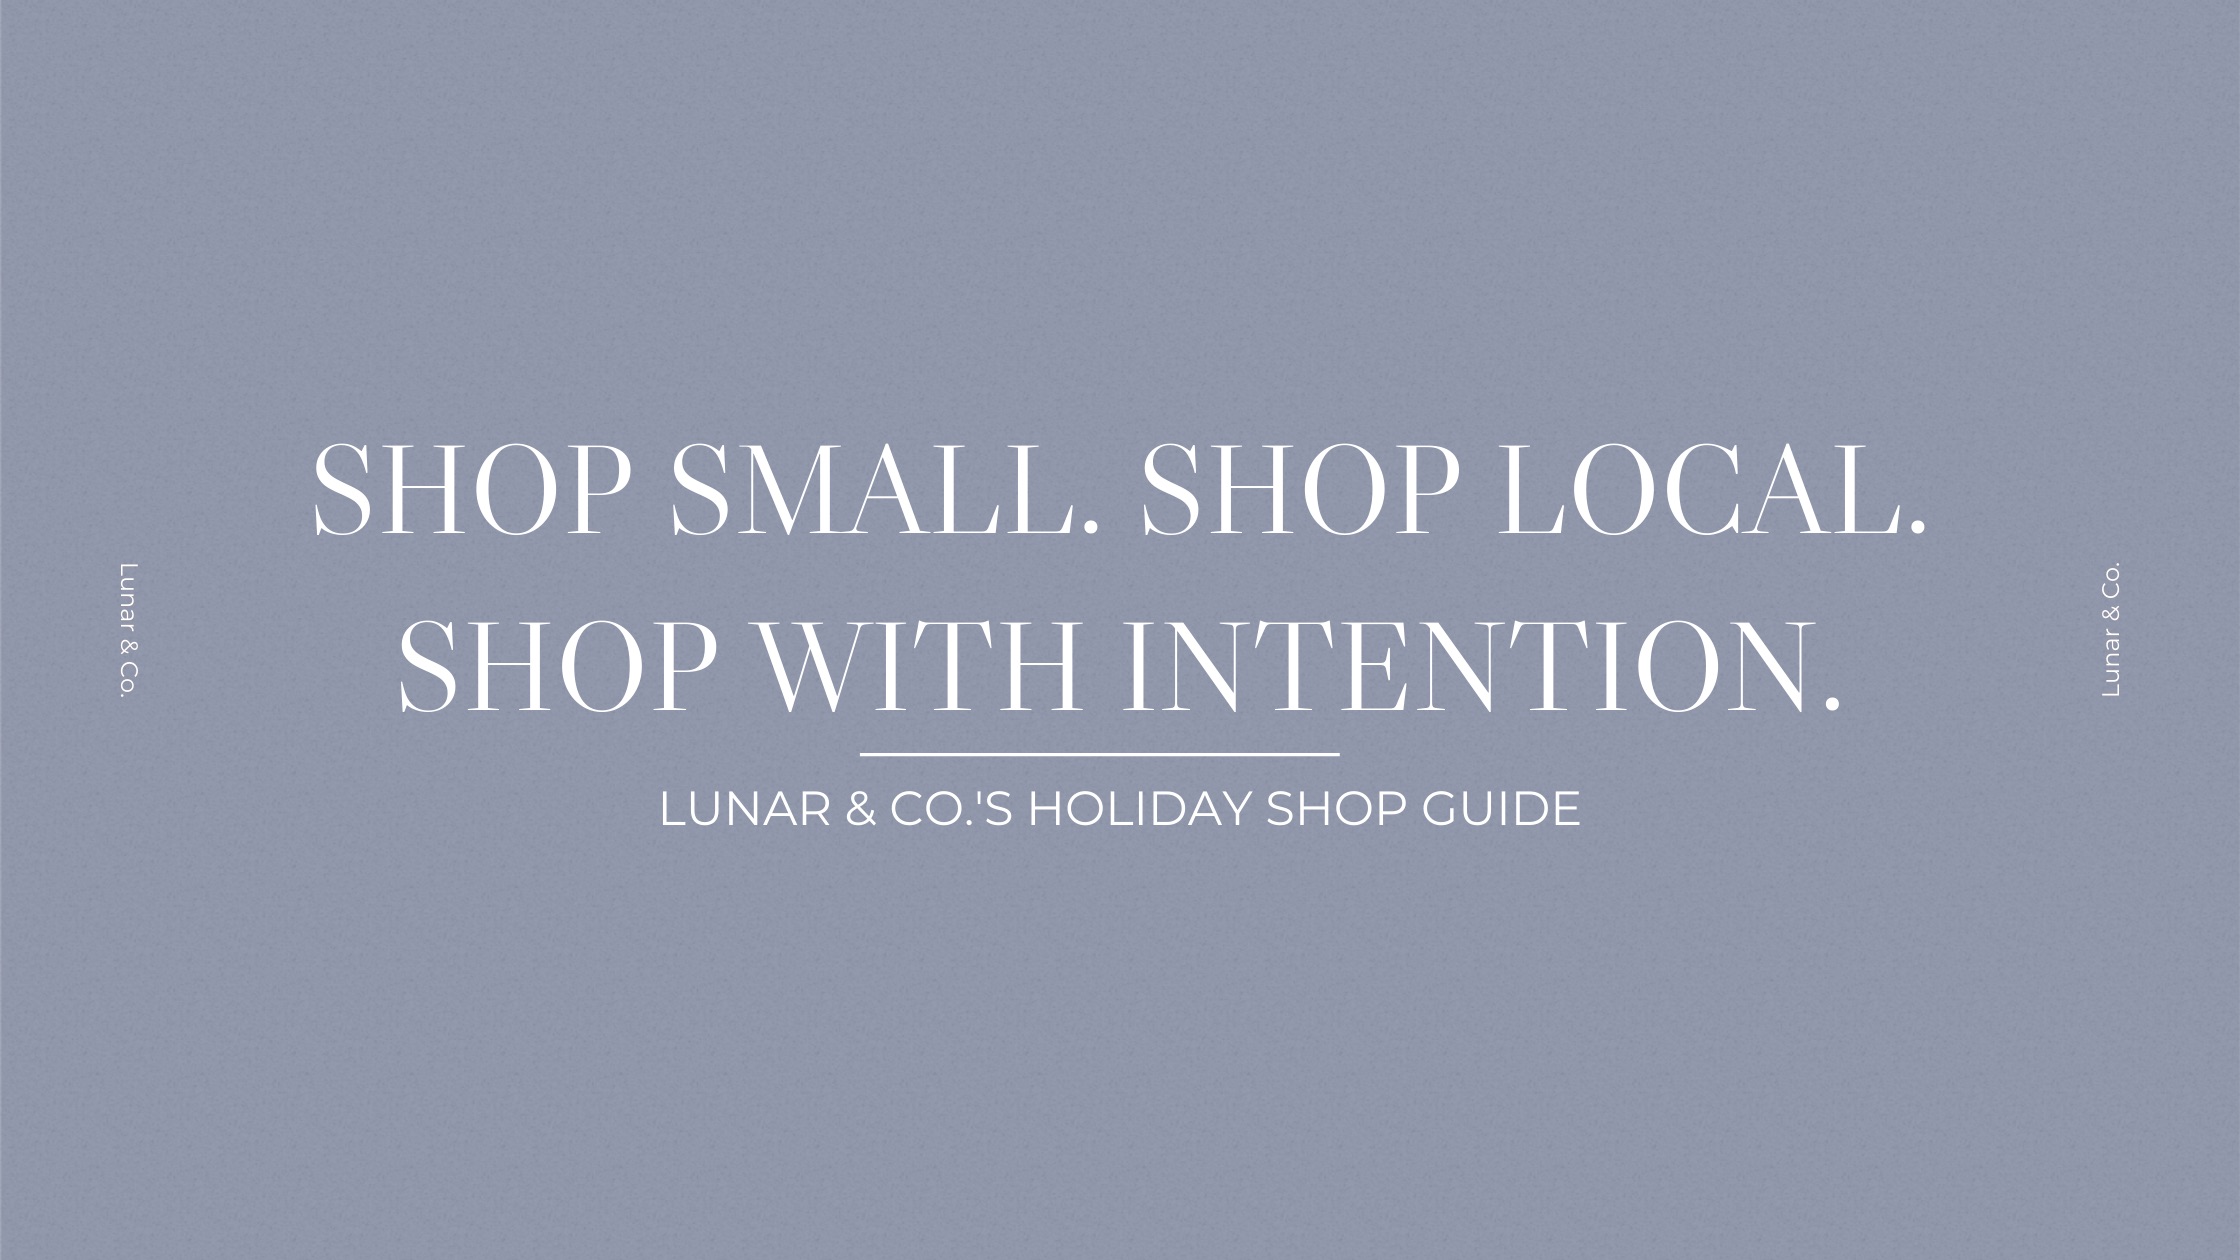 shop small, local and with intention